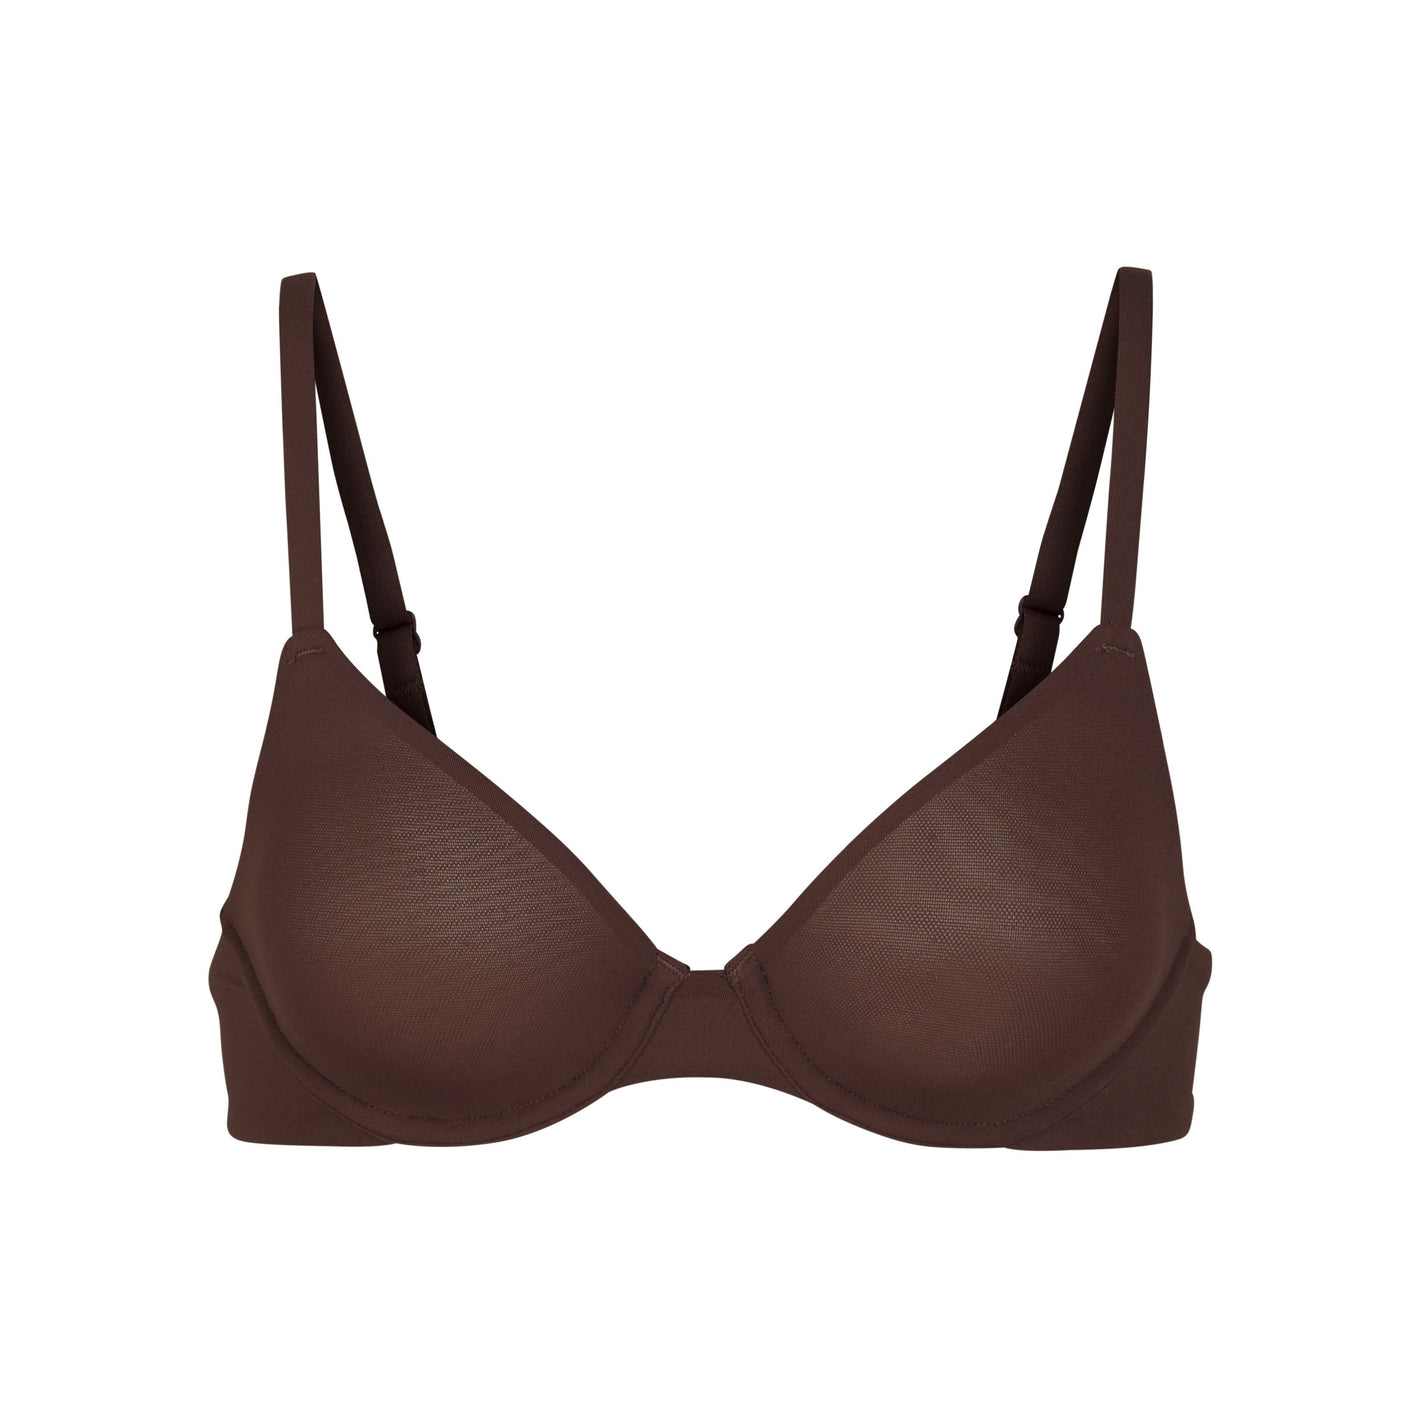 SKIMS New Bra 32C Black Size undefined - $41 New With Tags - From Adrianna